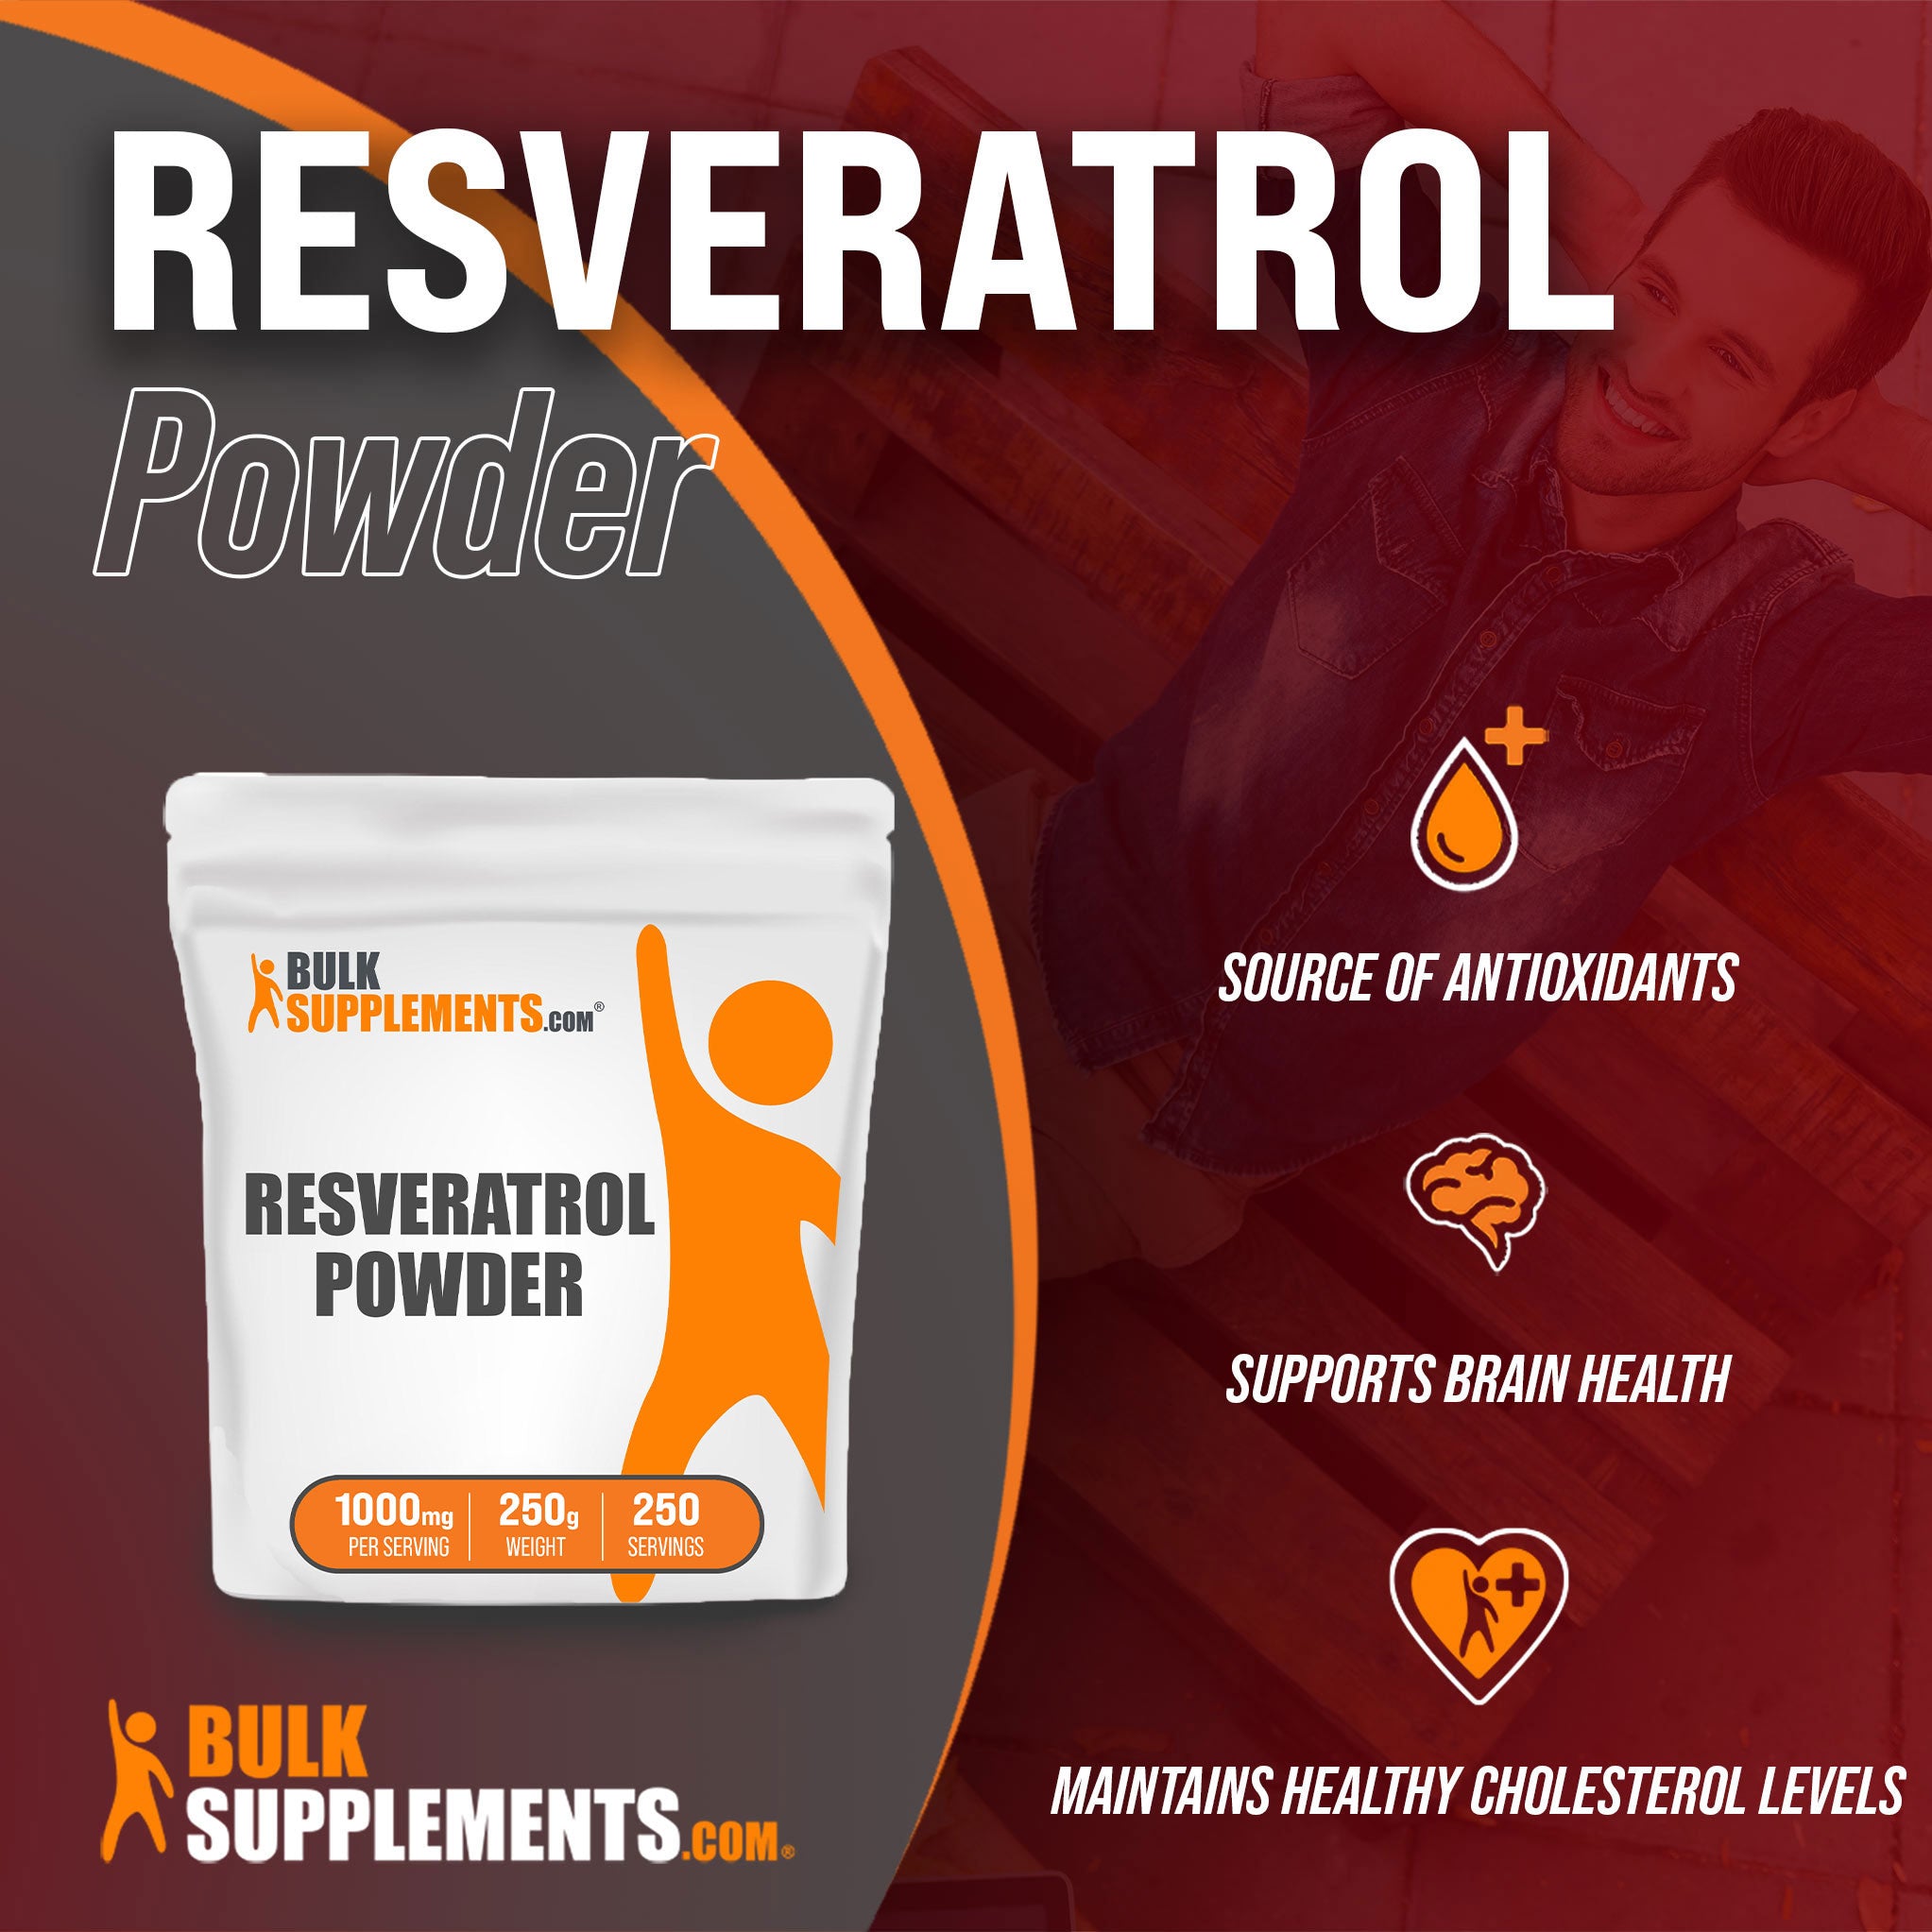 Benefits of Resveratrol: source of antioxidants, supports brain health, maintains healthy cholesterol levels